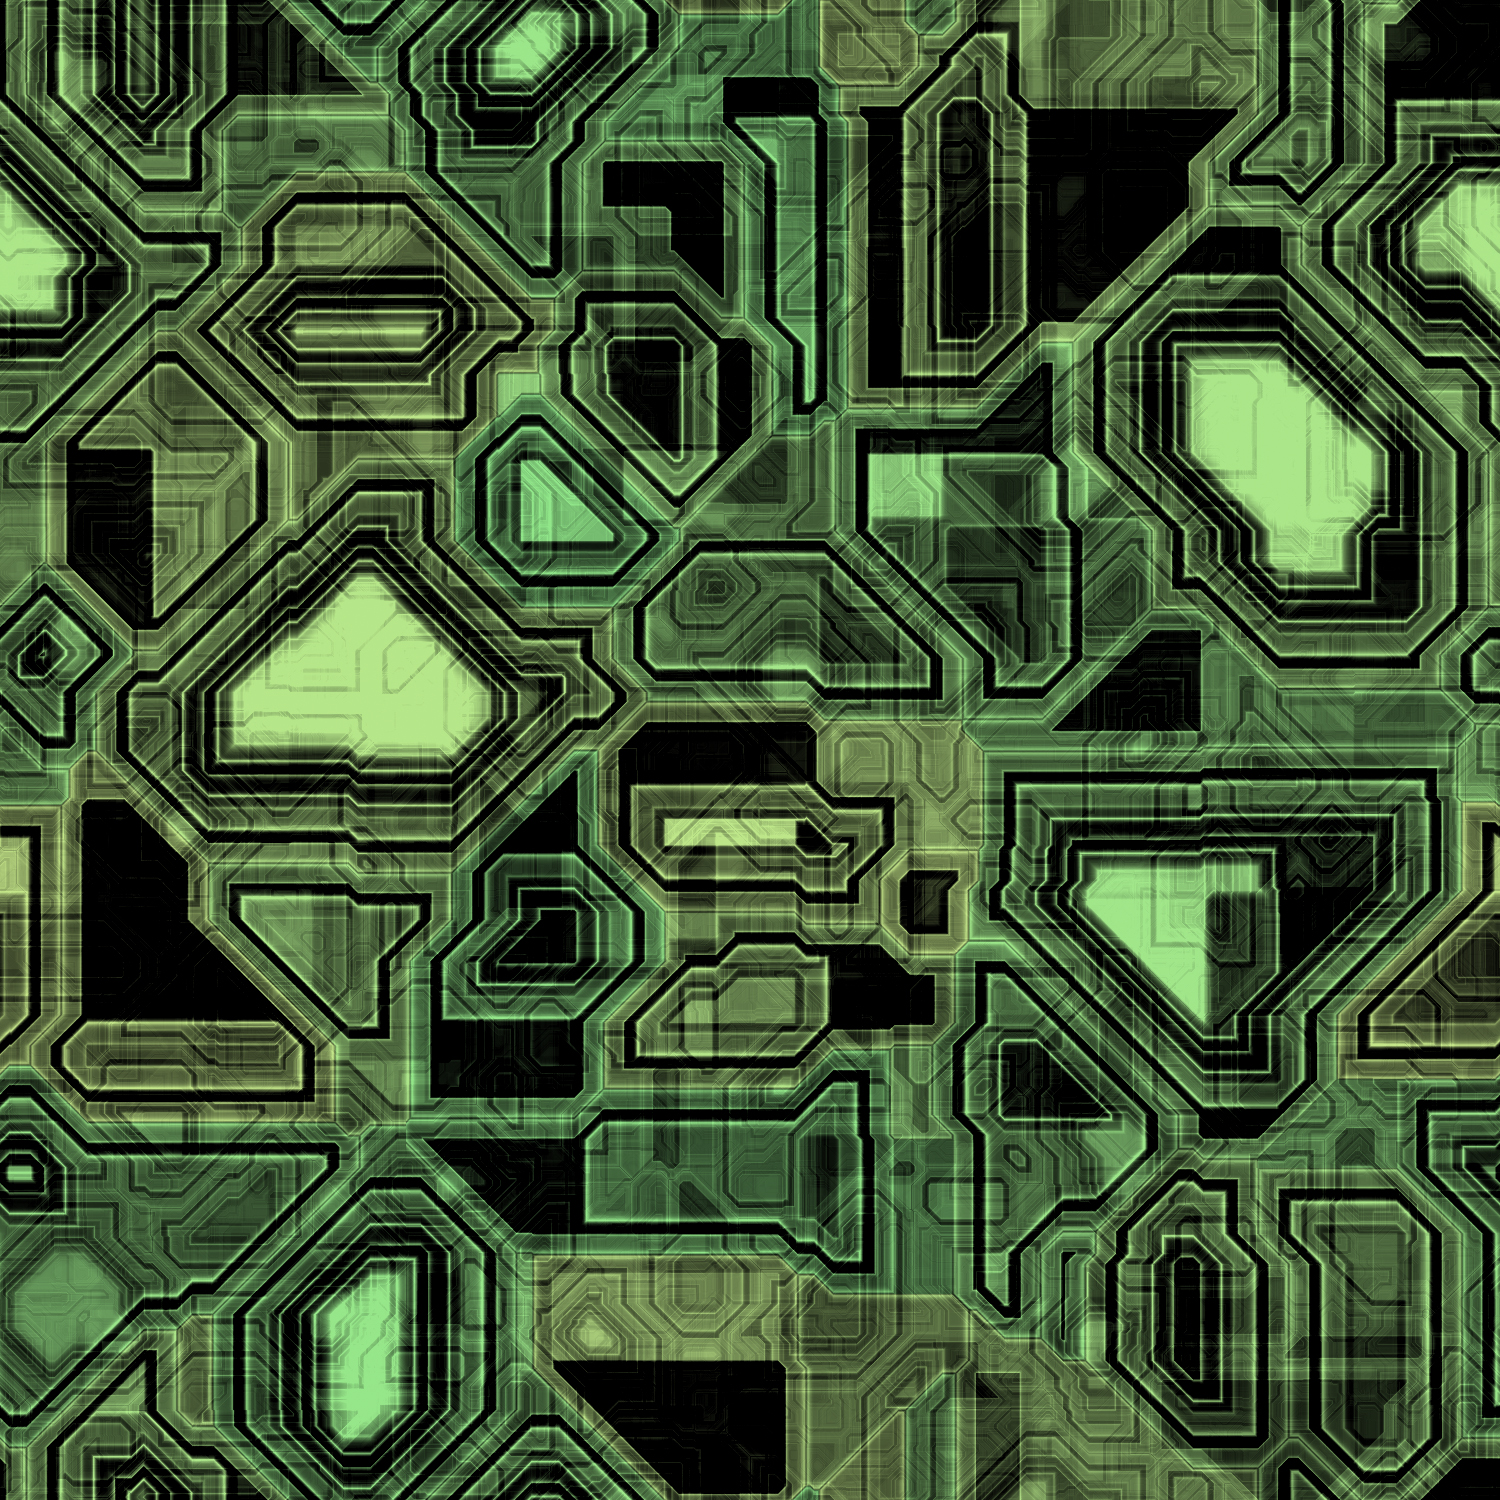 Circutry_Texture___Green_Black_by_SweetSoulSister.jpg